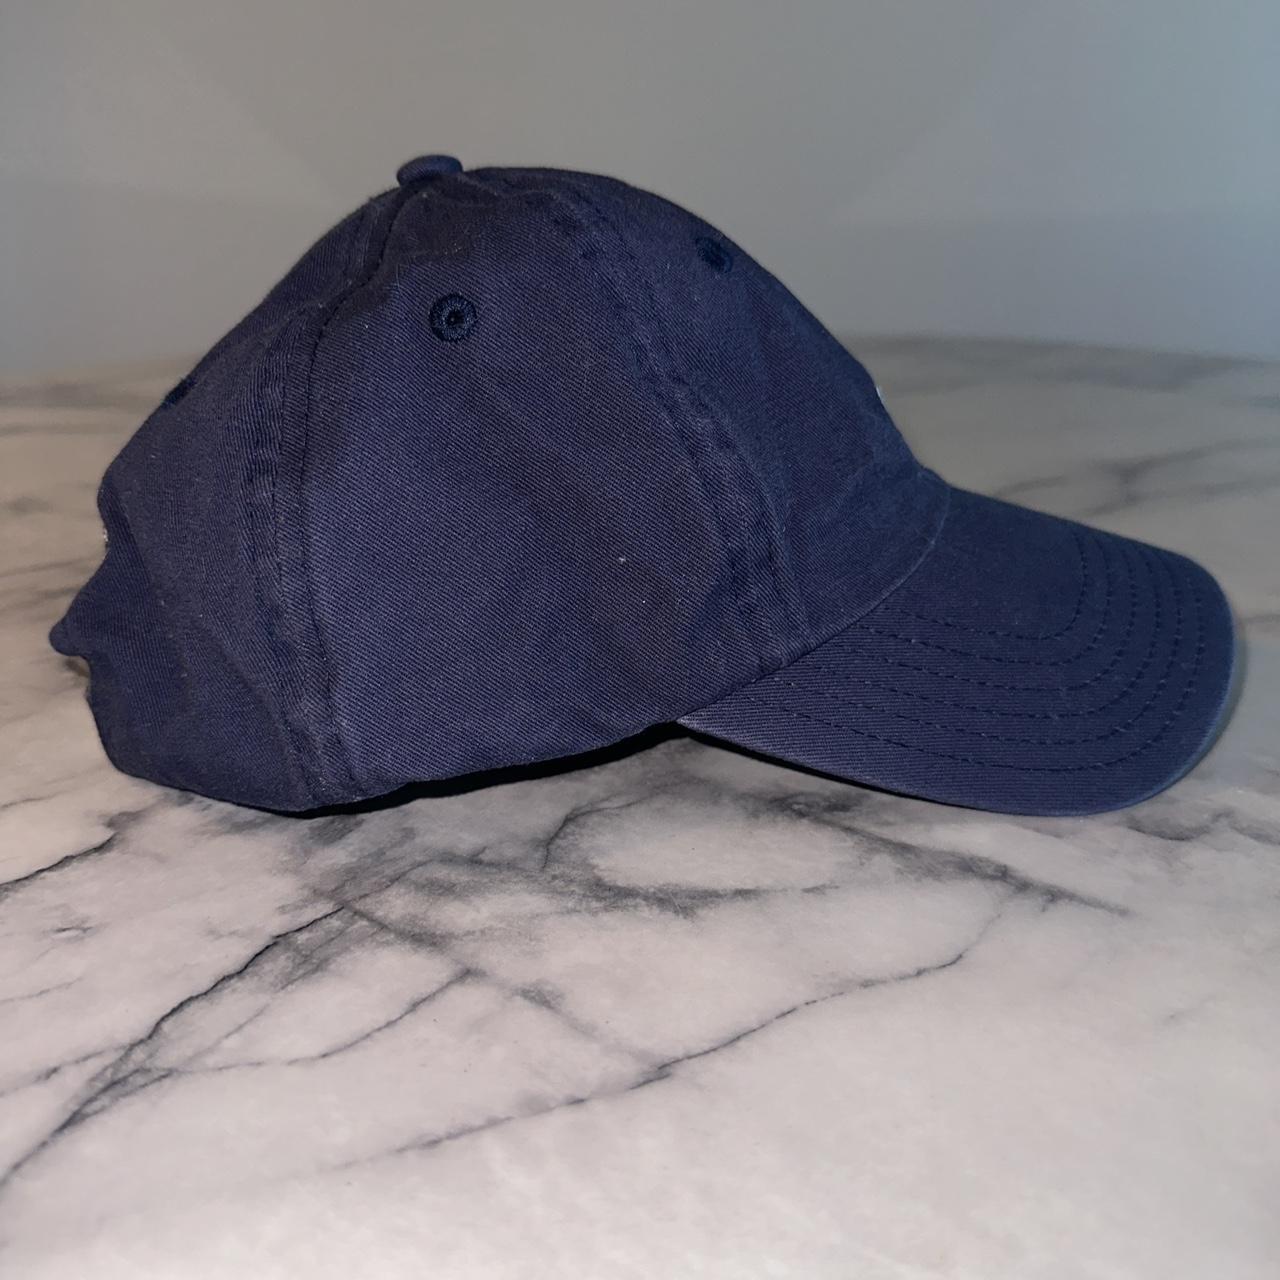 Classic Vineyard Vines Whale Relaxed Fit Strap Back Hat Baseball